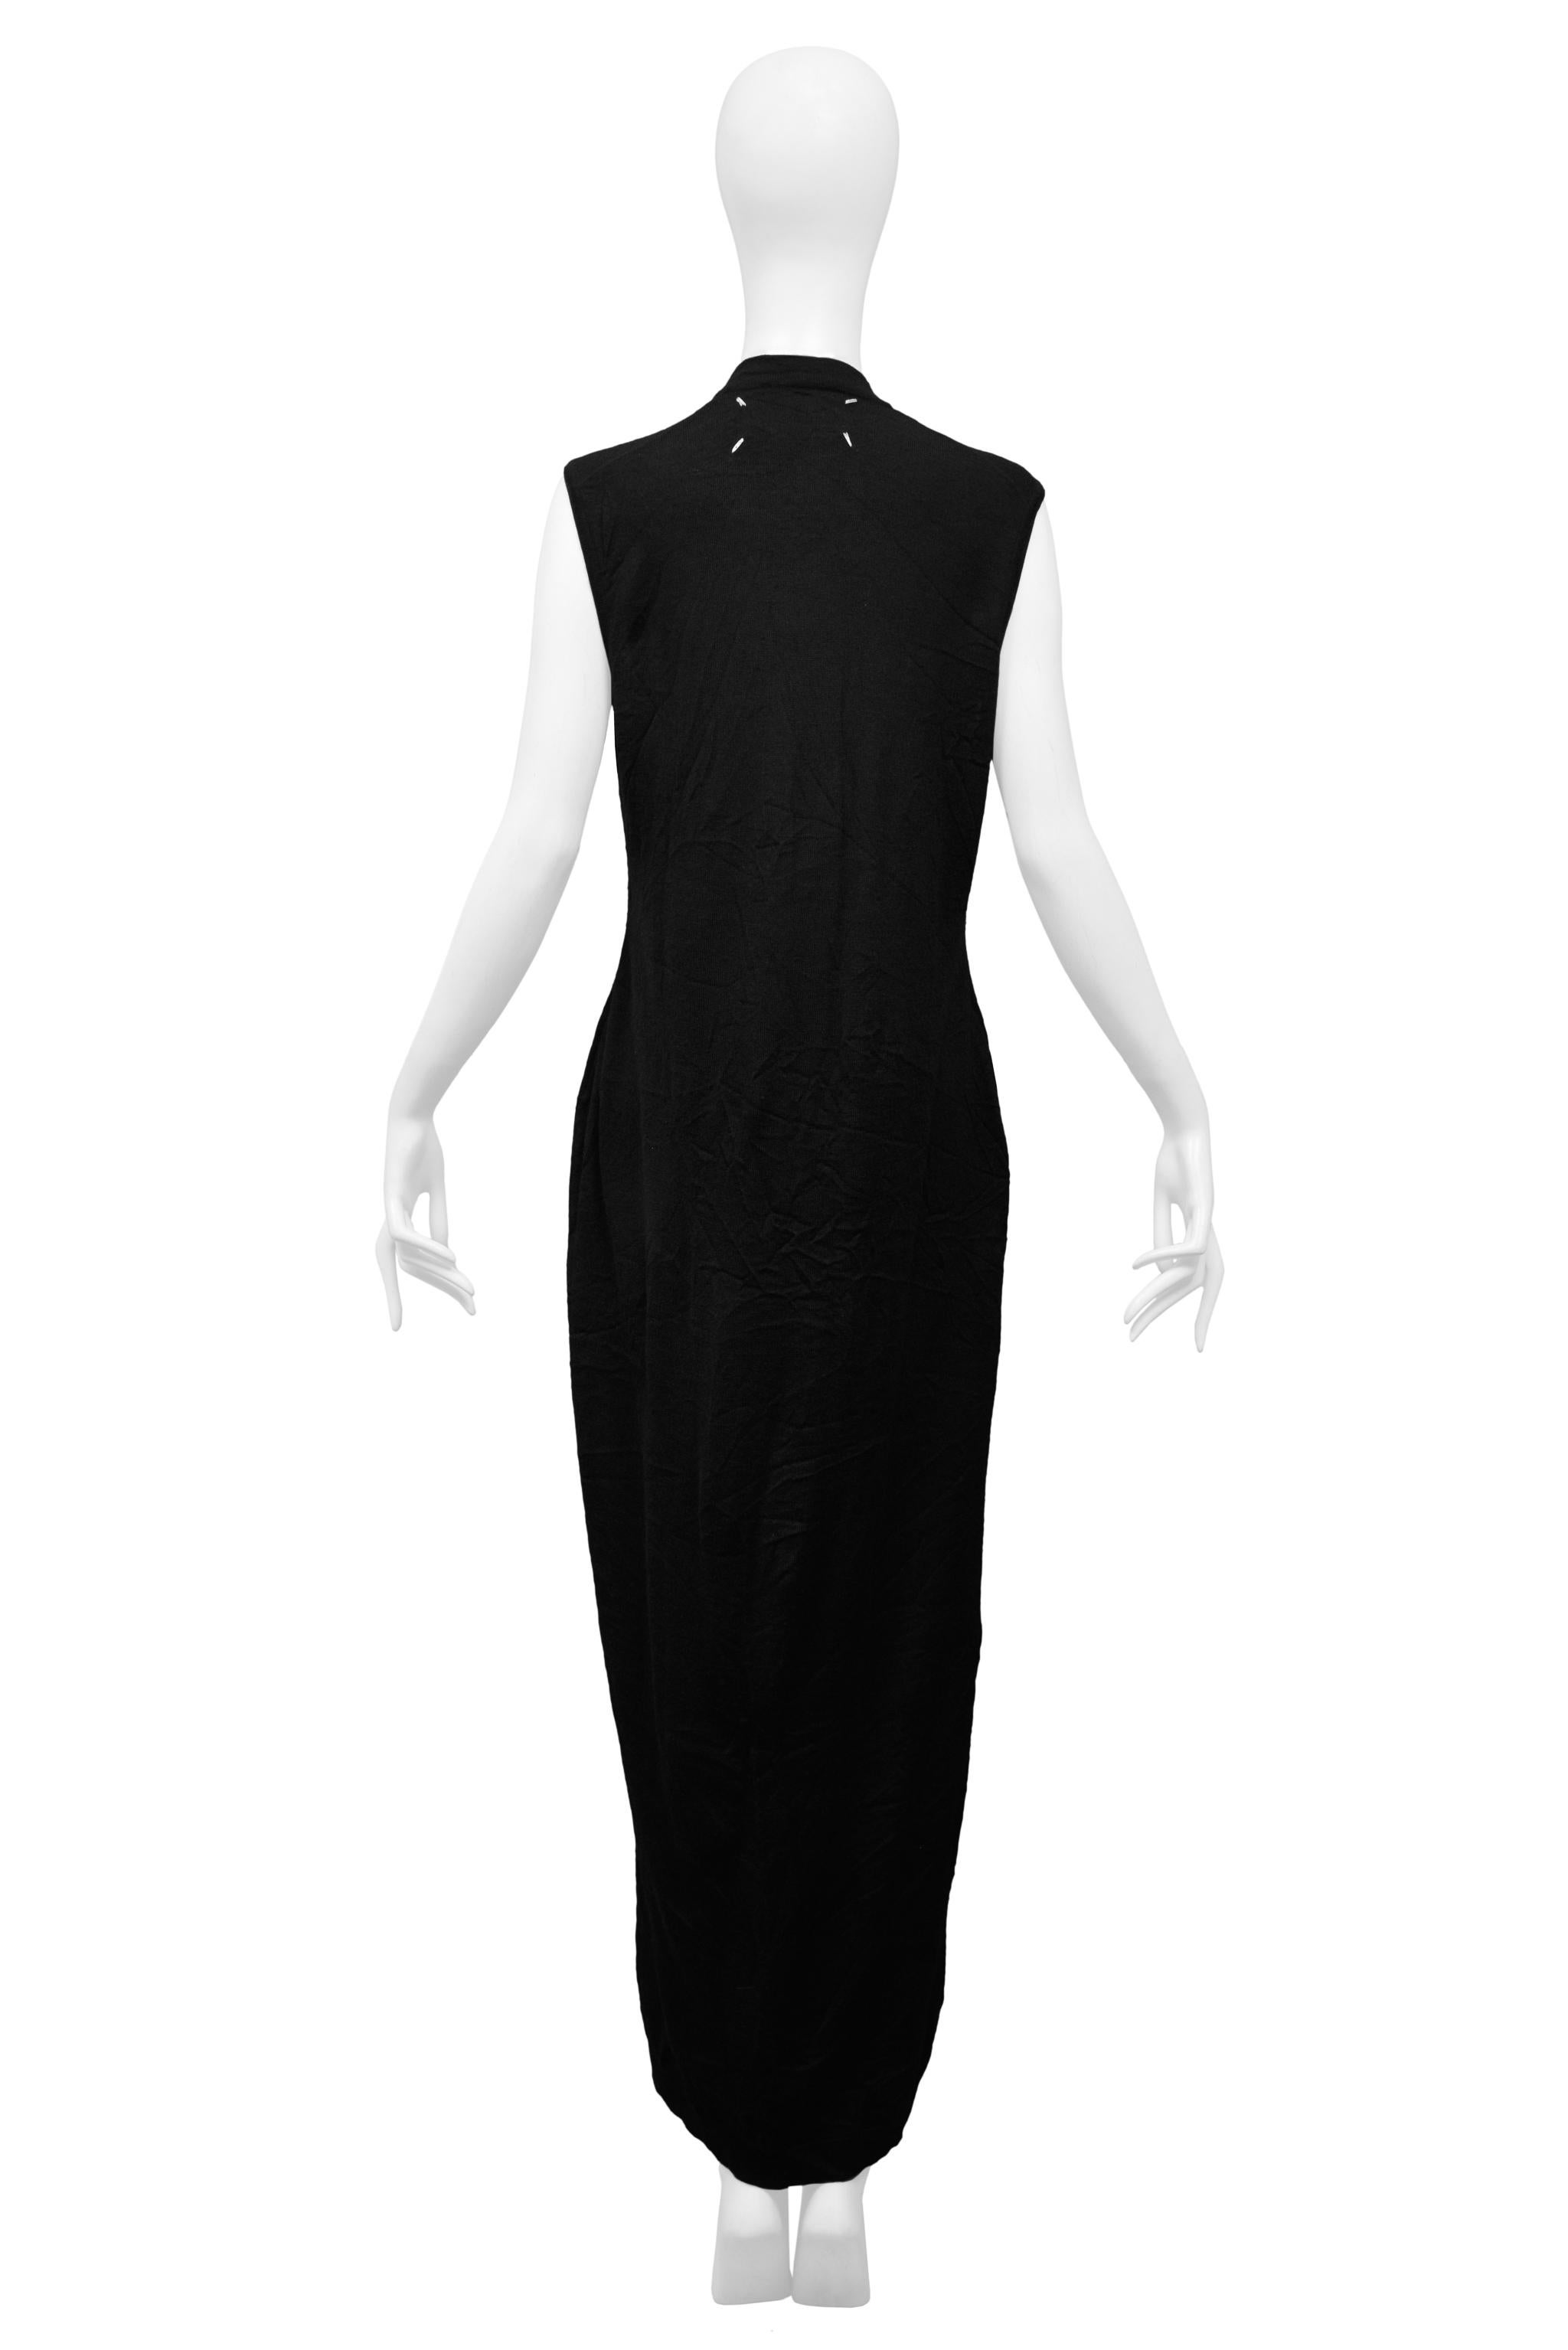 Maison Martin Margiela Black Oversized Maxi Sweater Dress In Excellent Condition For Sale In Los Angeles, CA